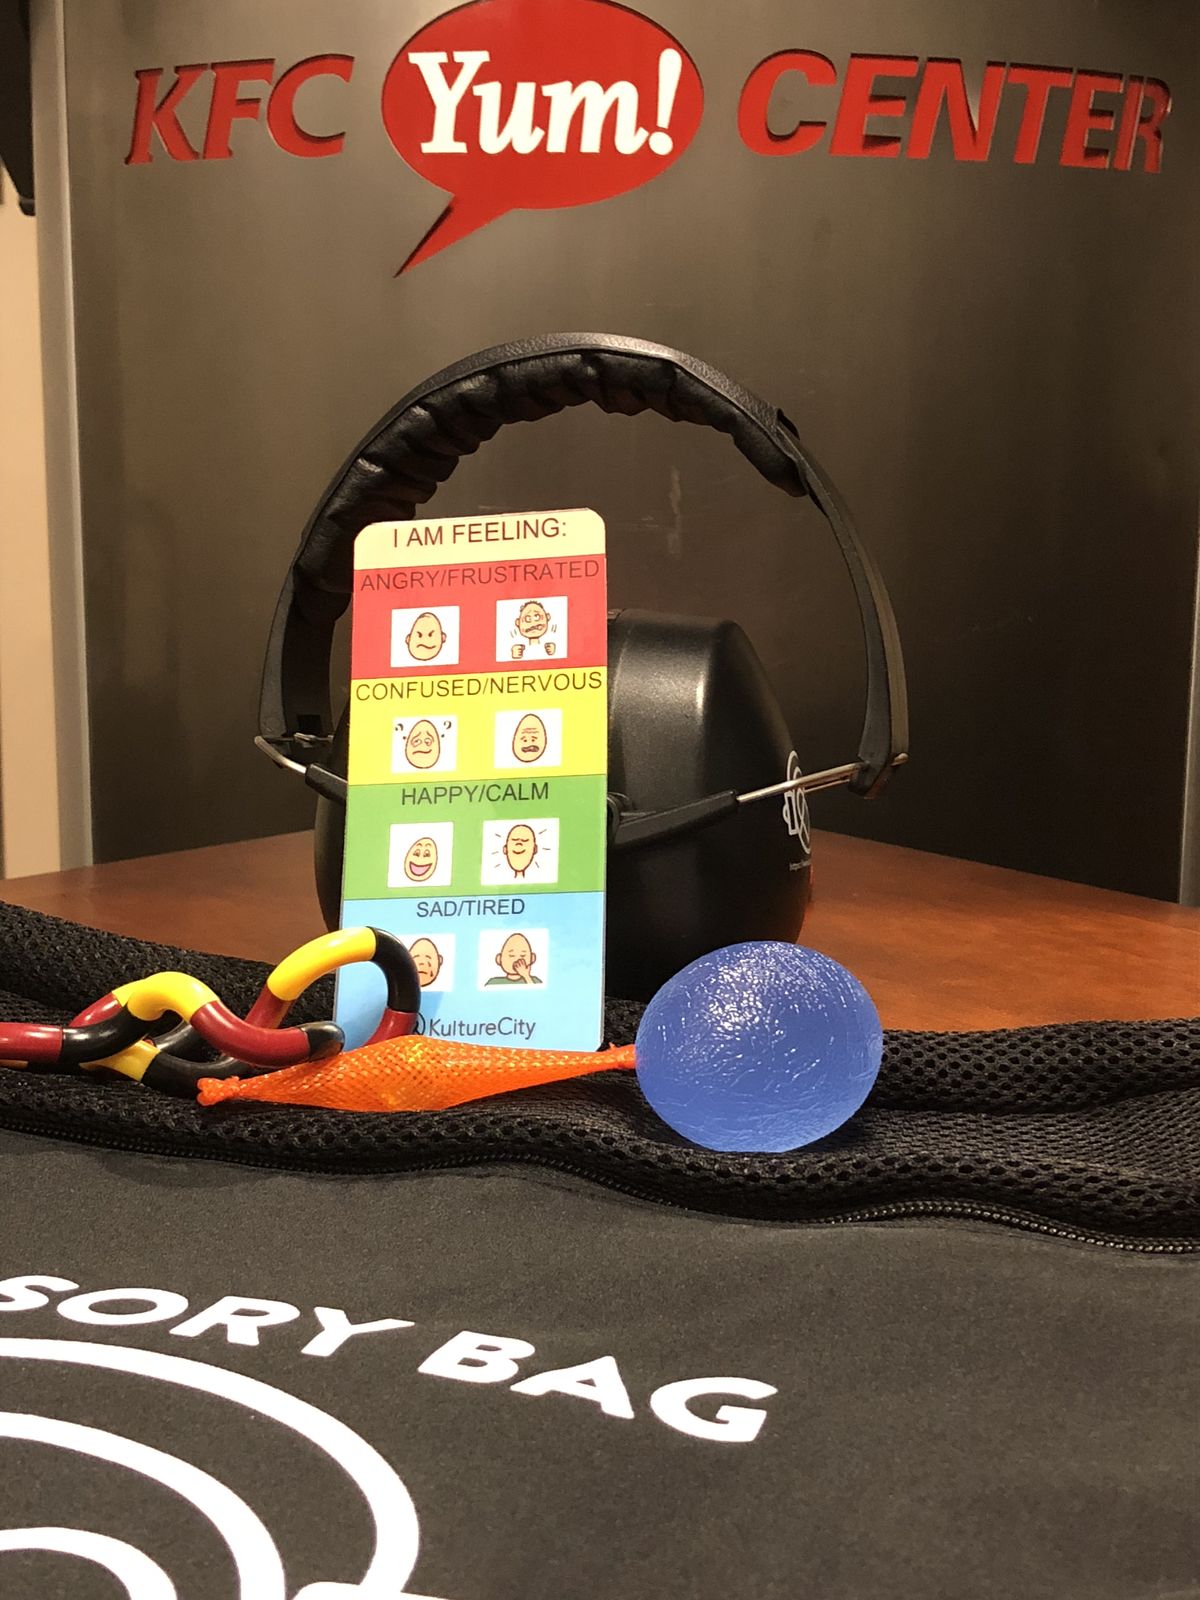 AEG Facilities’ KFC Yum! Center now offers sensory bags, equipped with noise canceling headphones, fidget tools, verbal cue cards and weighted lap pads will also be available to all guests at the venue who may feel overwhelmed by the environment.